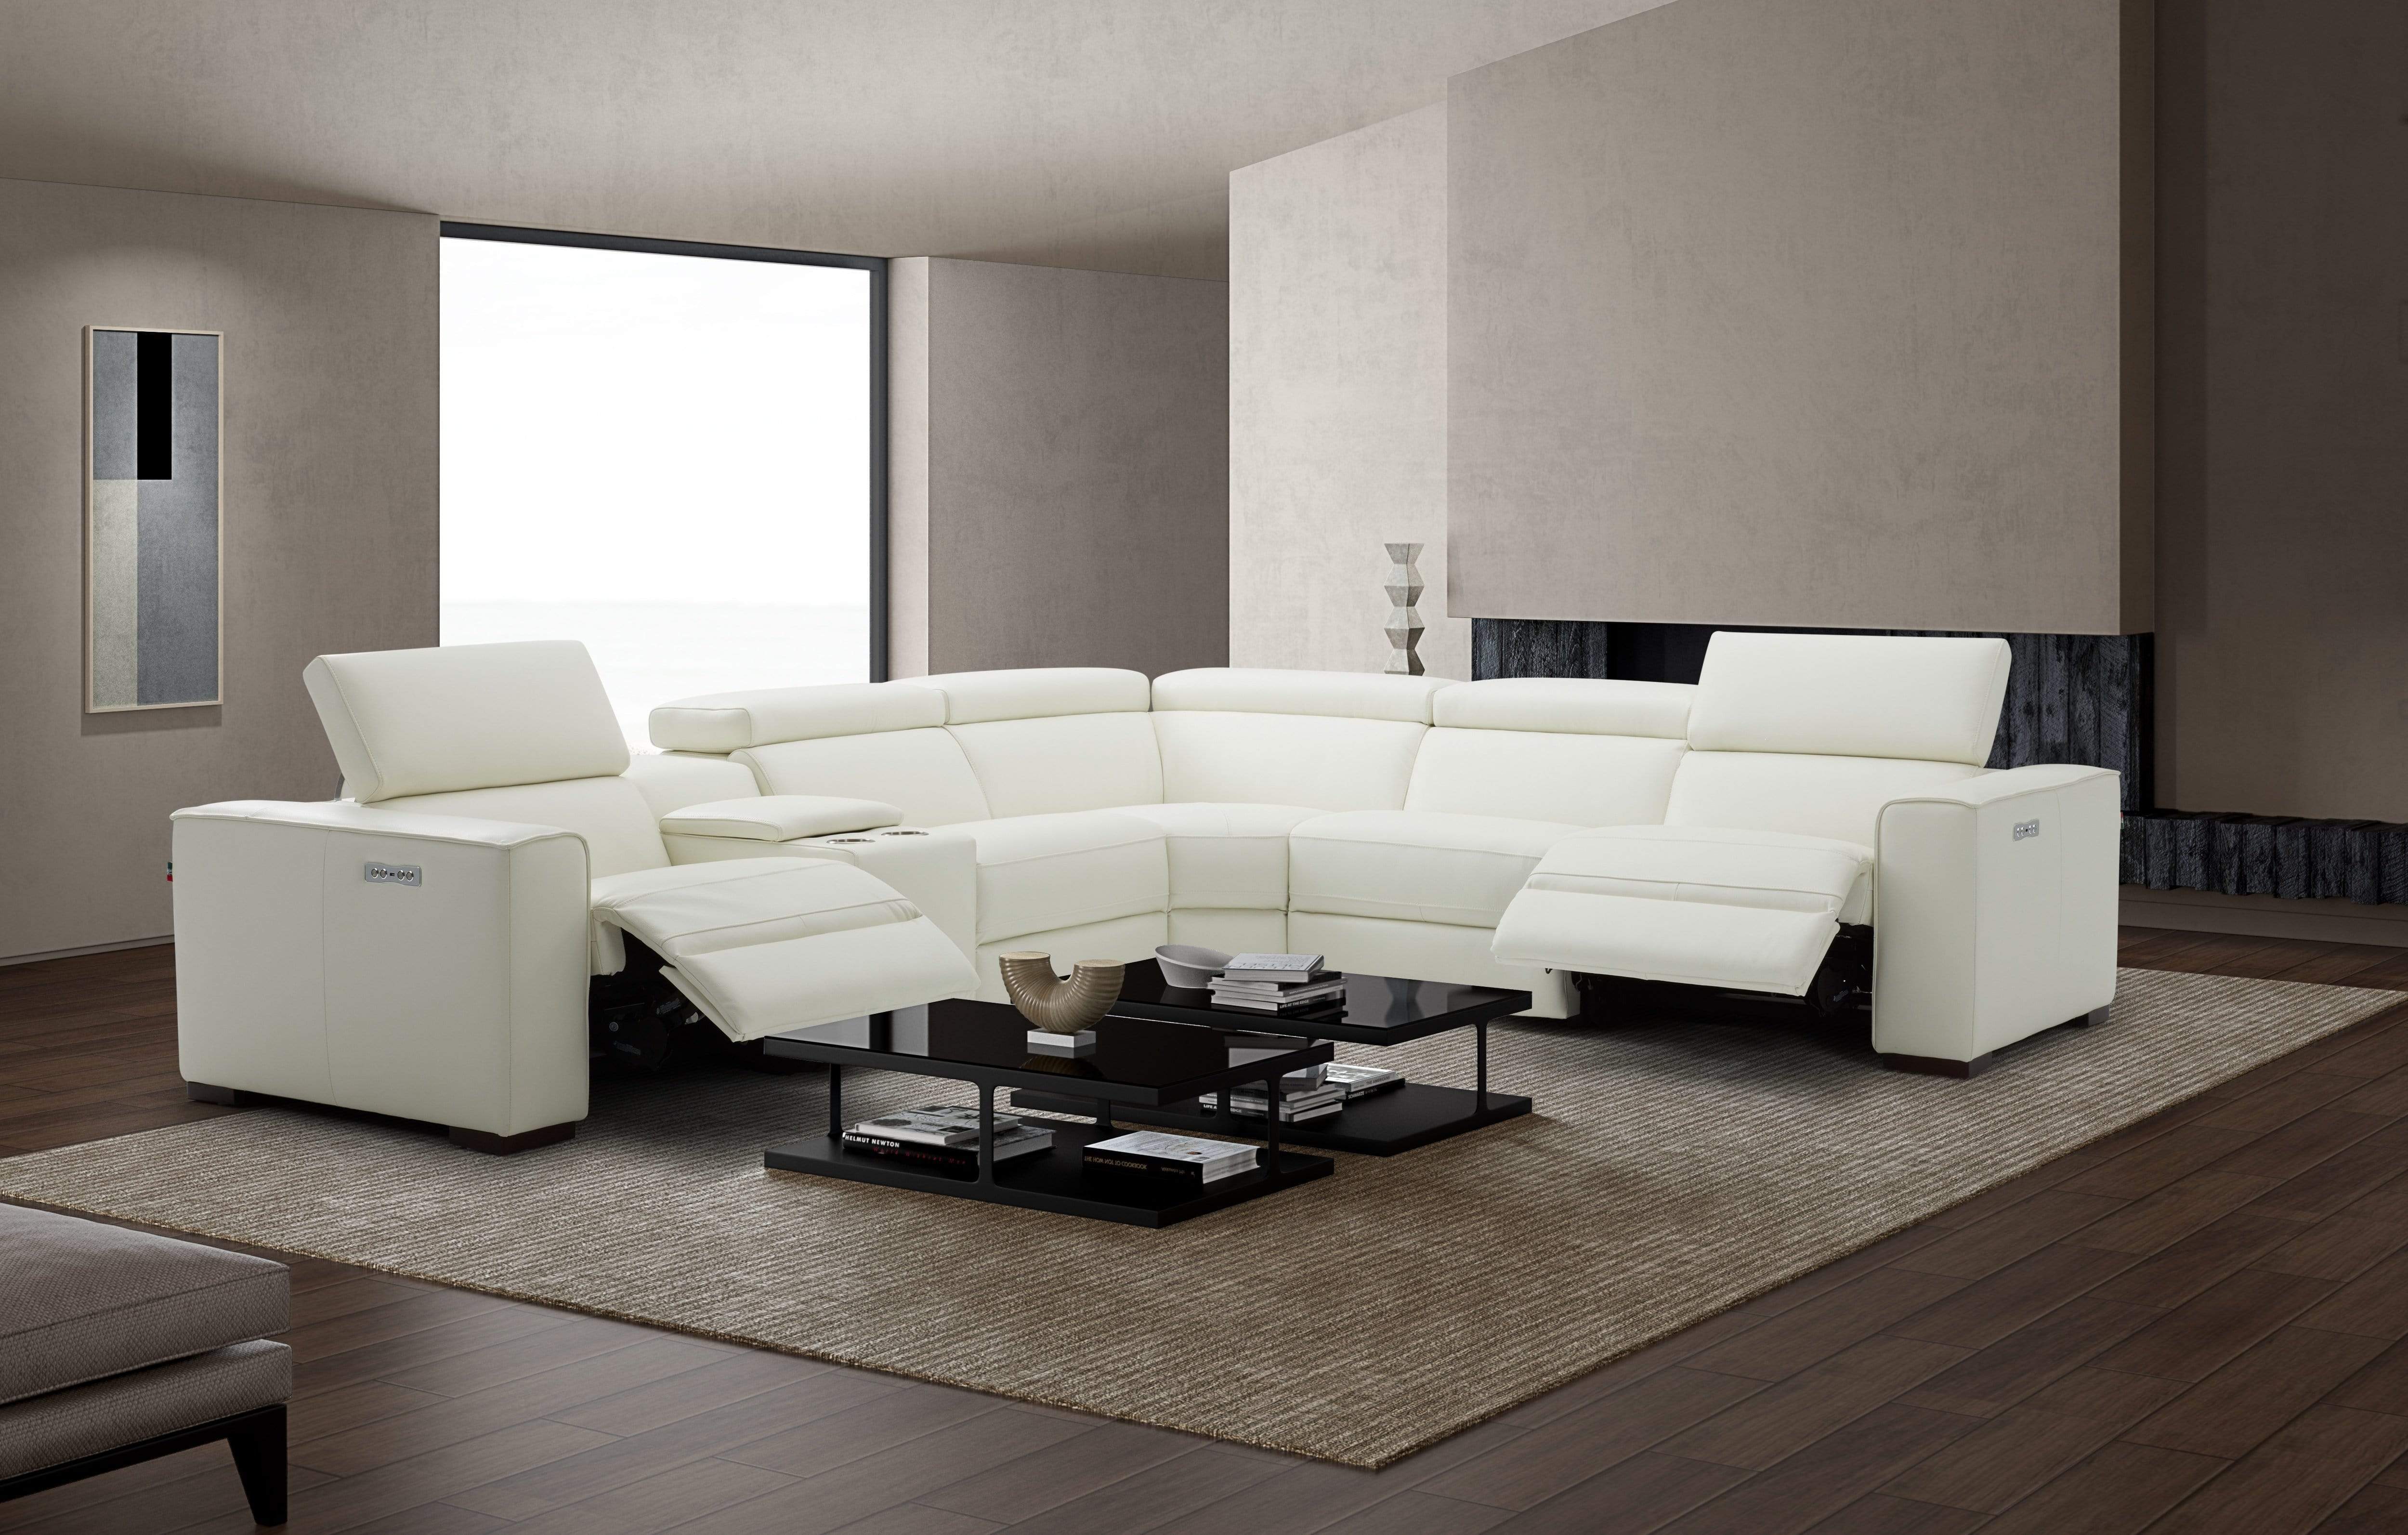 J and M Furniture Couches & Sofa Picasso 6pc Motion Sectional In Various Colors